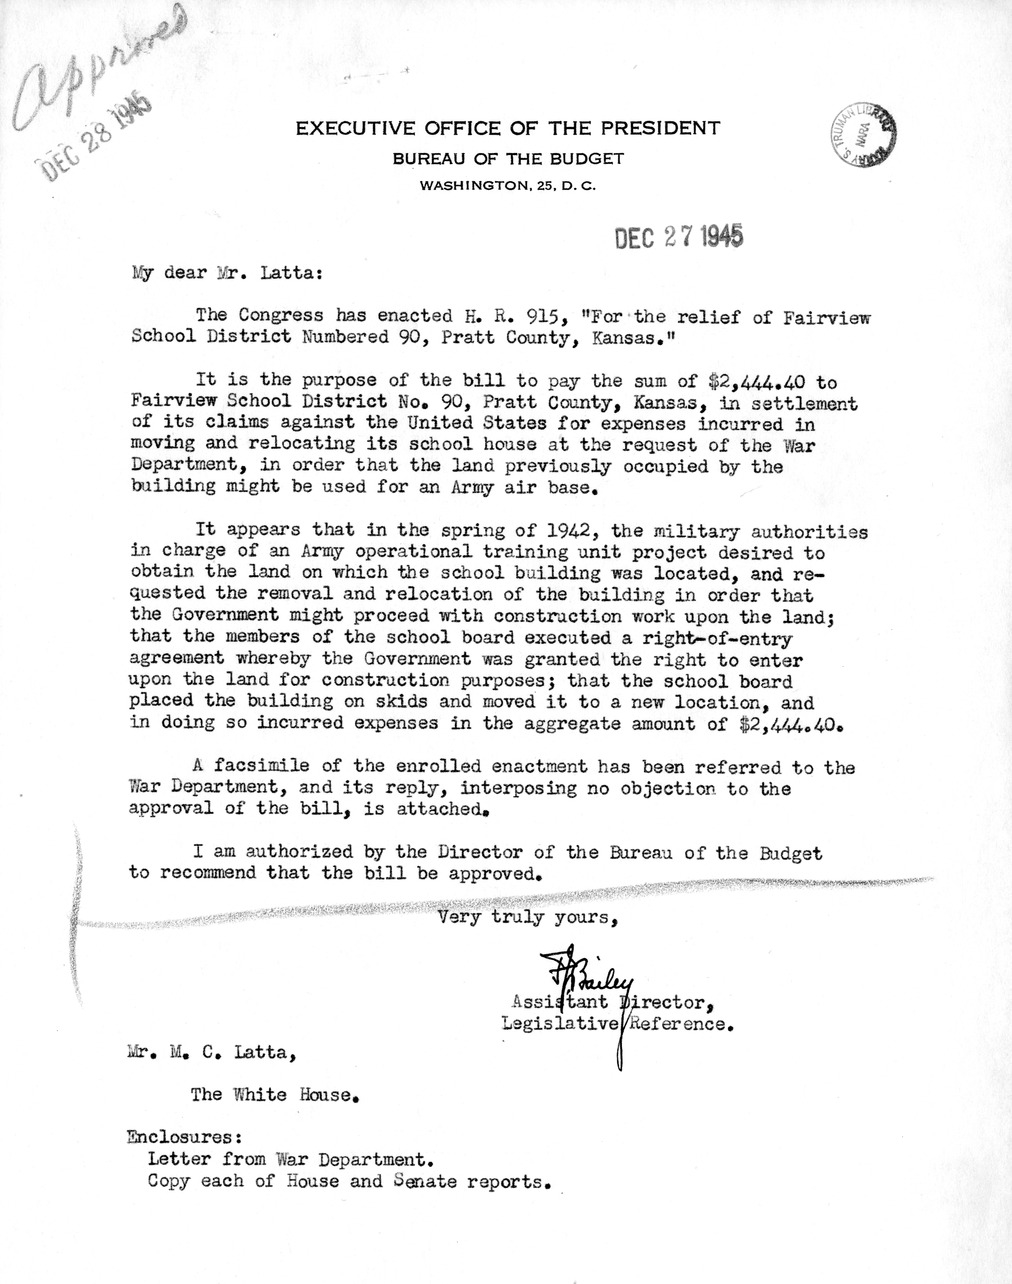 Memorandum from Frederick J. Bailey to M. C. Latta, H.R. 915, For the Relief of Fairview School District Numbered 90, Pratt County, Kansas, with Attachments